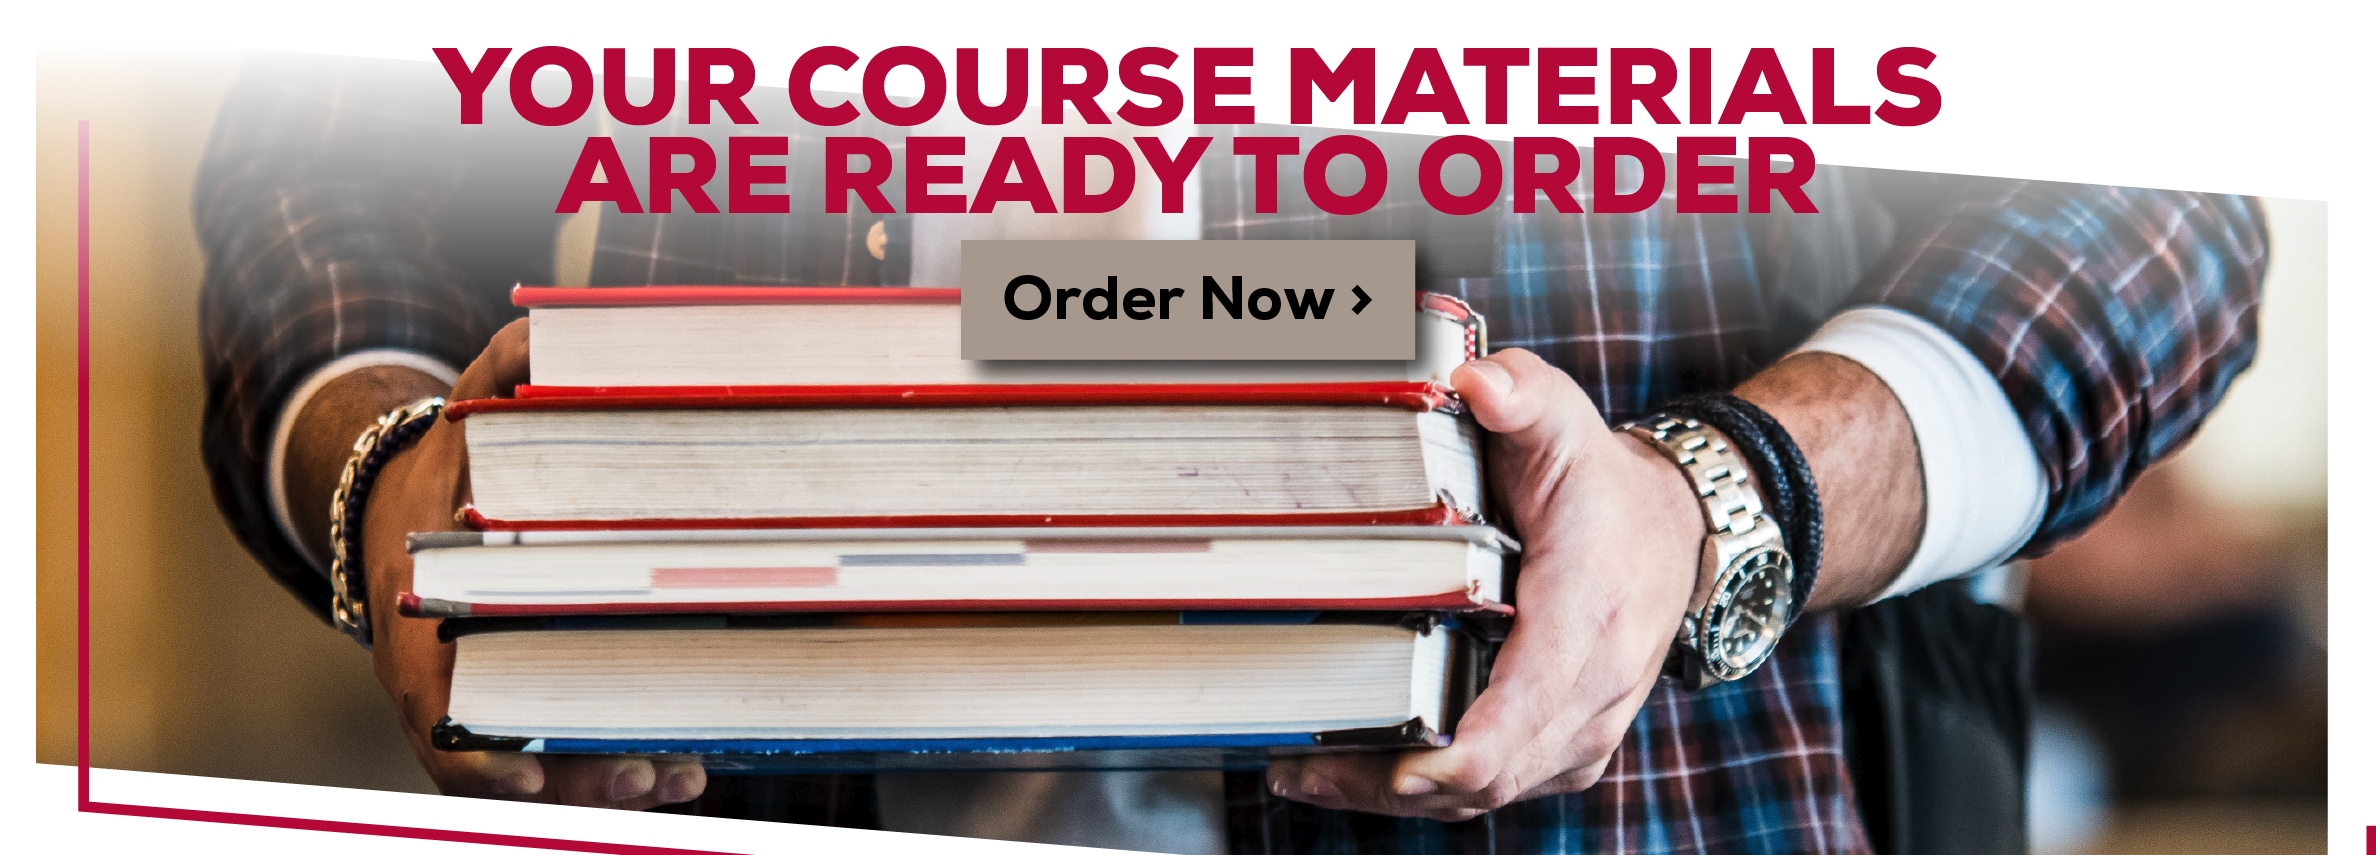 Your Course Materials are Ready to Order. Order Now.  *Excludes marketplace purchases.